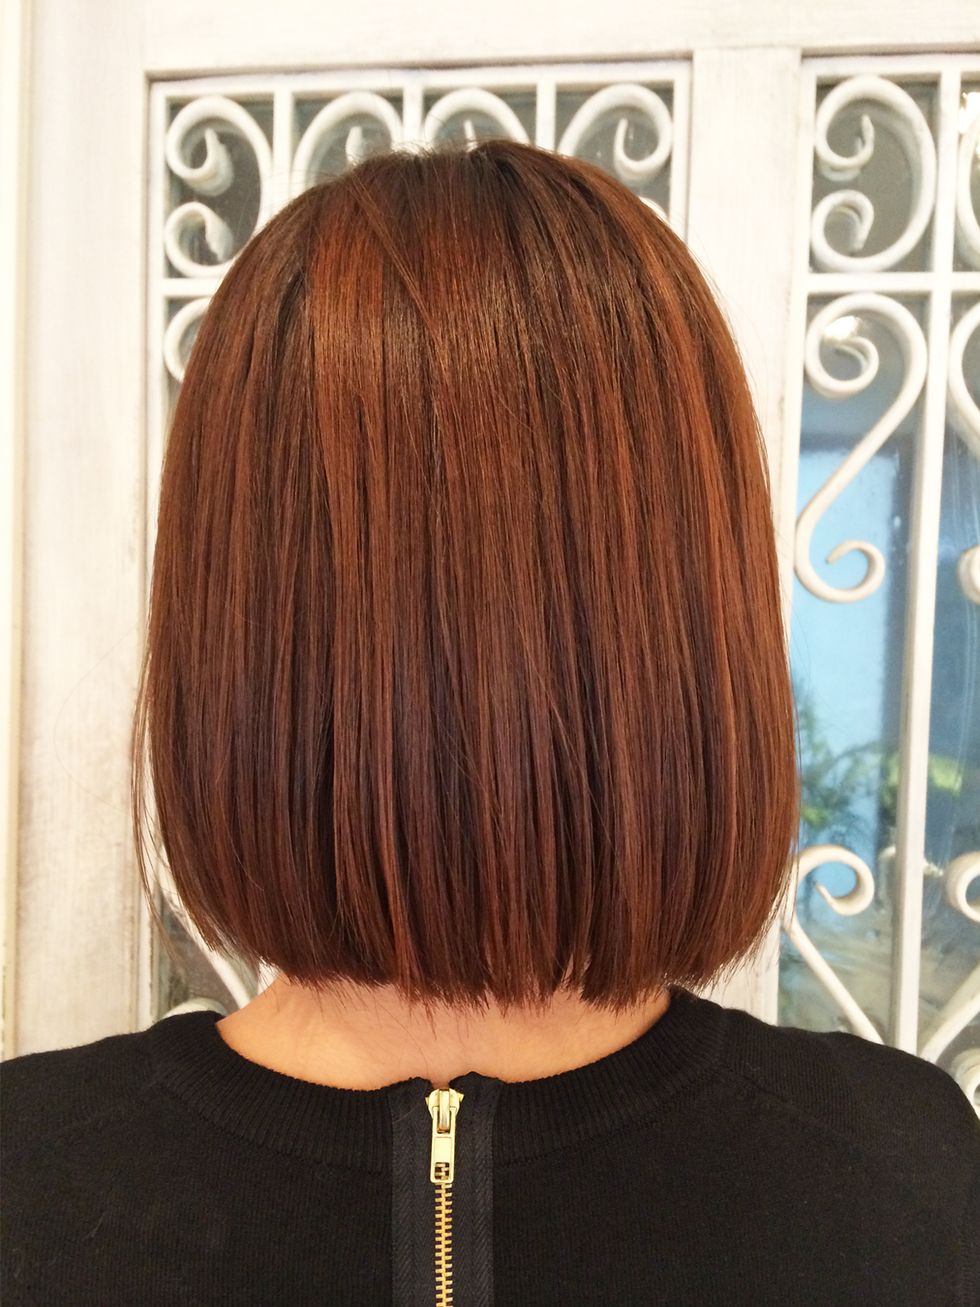 Hairstyle, Style, Hair coloring, Brown hair, Liver, Bangs, Red hair, Blond, Artificial hair integrations, Bob cut, 